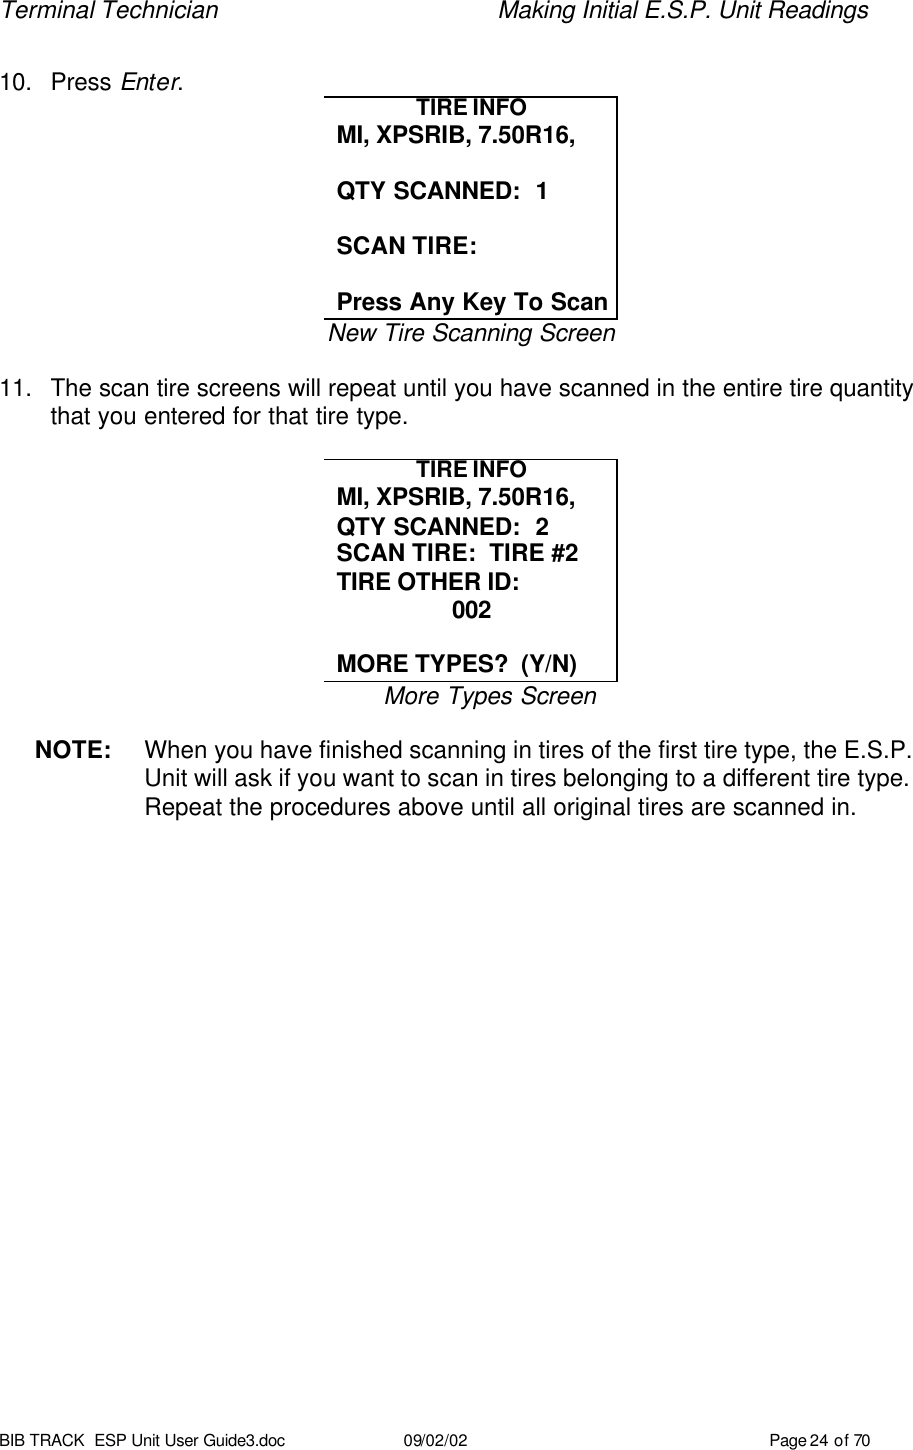 Terminal Technician    Making Initial E.S.P. Unit Readings BIB TRACK  ESP Unit User Guide3.doc 09/02/02 Page 24 of 70  10. Press Enter.   TIRE INFO MI, XPSRIB, 7.50R16,  QTY SCANNED:  1  SCAN TIRE:  Press Any Key To Scan New Tire Scanning Screen  11. The scan tire screens will repeat until you have scanned in the entire tire quantity that you entered for that tire type.  TIRE INFO MI, XPSRIB, 7.50R16, QTY SCANNED:  2 SCAN TIRE:  TIRE #2 TIRE OTHER ID:  002  MORE TYPES?  (Y/N) More Types Screen  NOTE: When you have finished scanning in tires of the first tire type, the E.S.P. Unit will ask if you want to scan in tires belonging to a different tire type. Repeat the procedures above until all original tires are scanned in. 